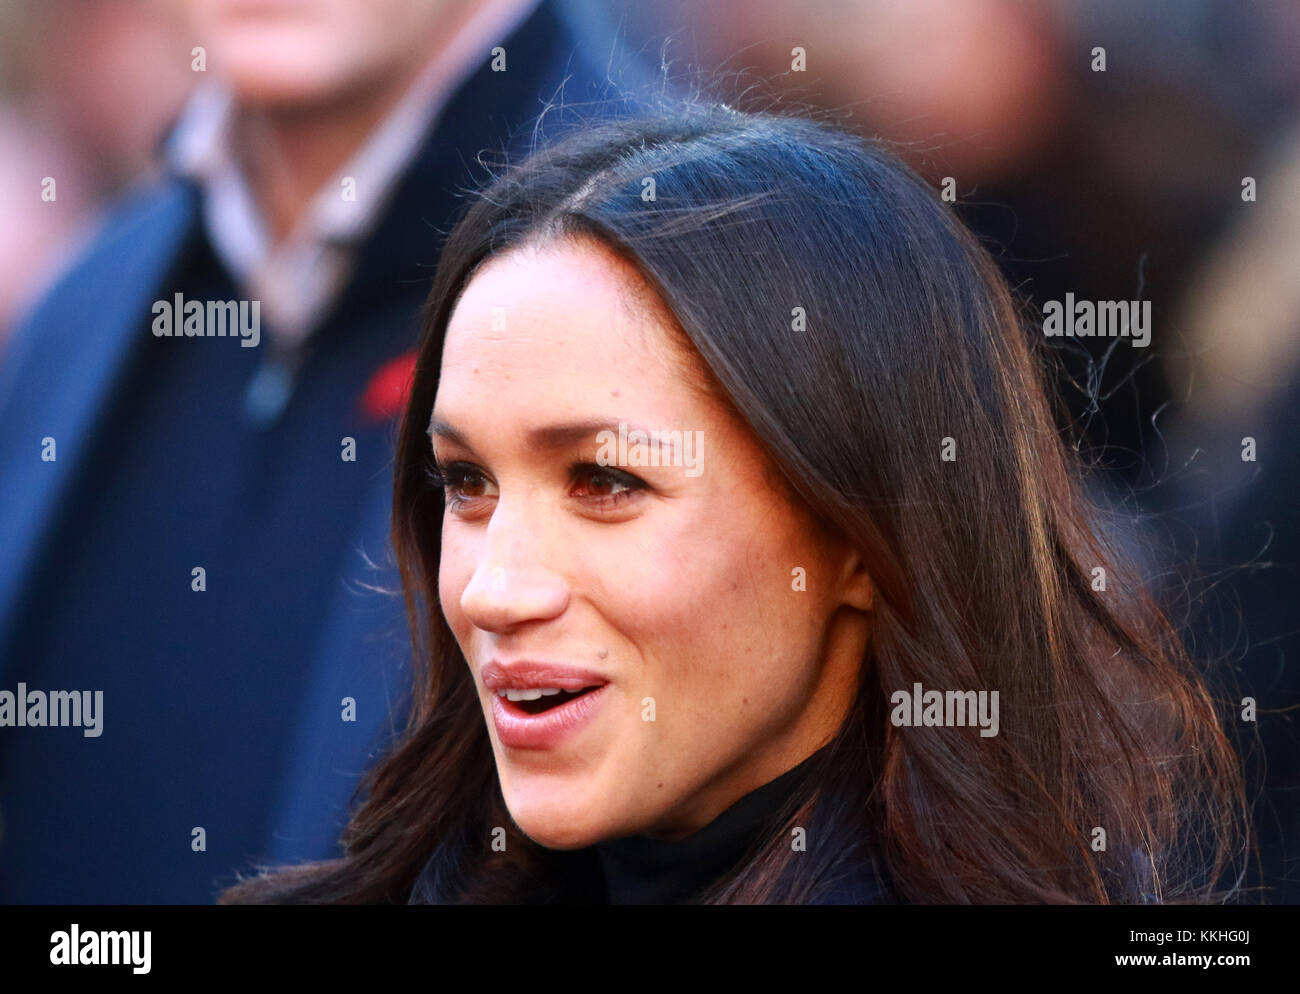 Nottingham, UK. 01st Dec, 2017. Meghan Markle HRH Prince Harry (of Wales) and Meghan Markle on their first official engagement together, since announcing their engagement earlier in the week. They started their visit at National Justice Museum, before walking to the Nottingham Contemporary, which is hosting a Terrence Higgins Trust World Aids Day charity fair, in Nottingham, Nottinghamshire, on December 1, 2017. Credit: Paul Marriott/Alamy Live News Stock Photo